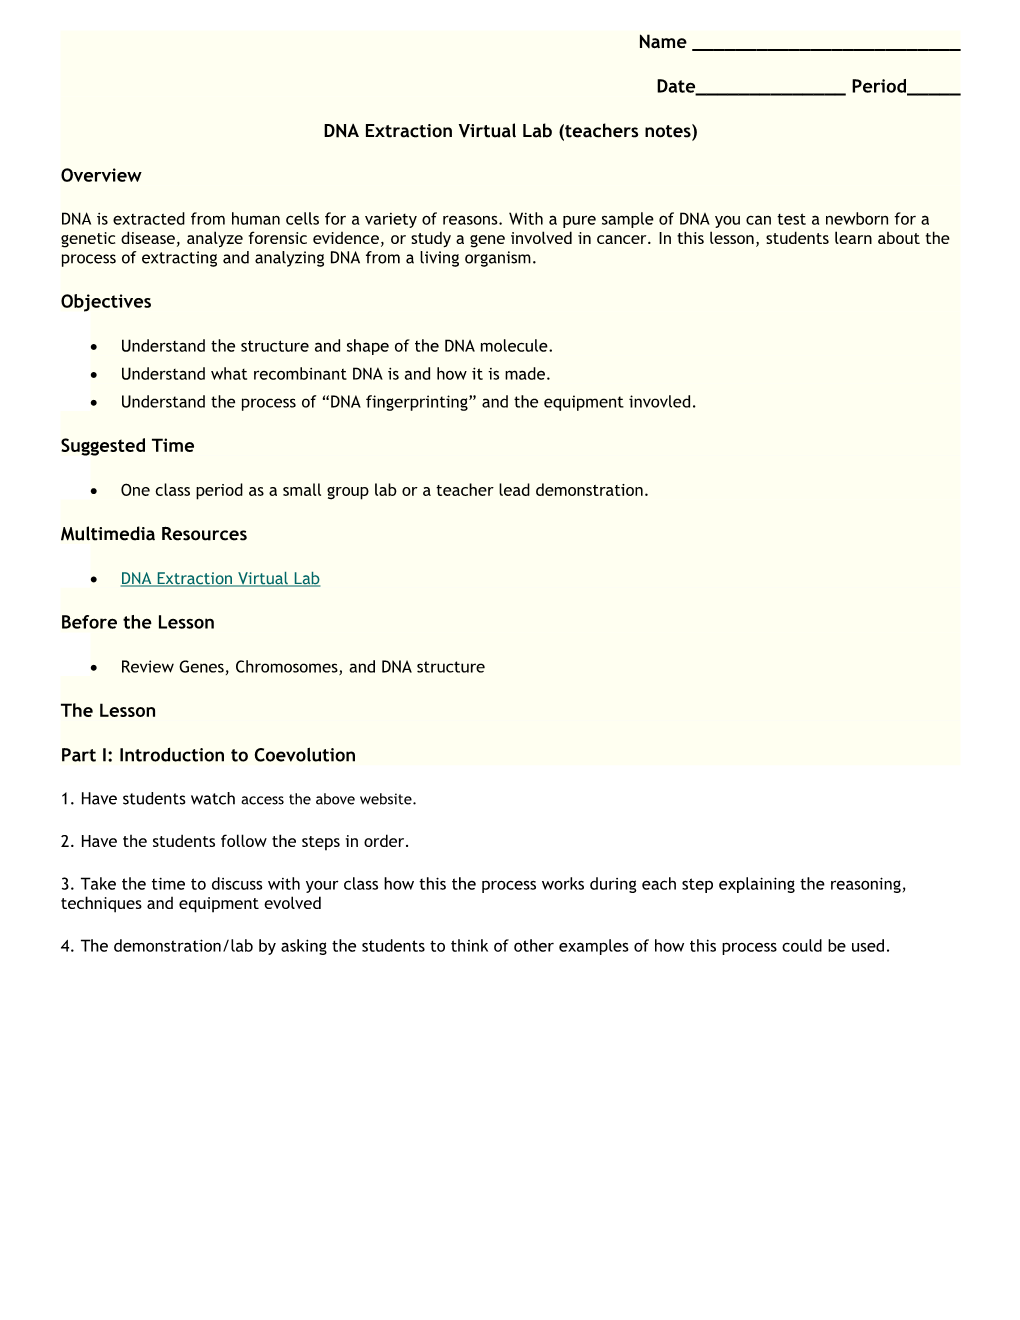 DNA Extraction Virtual Lab (Teachers Notes)